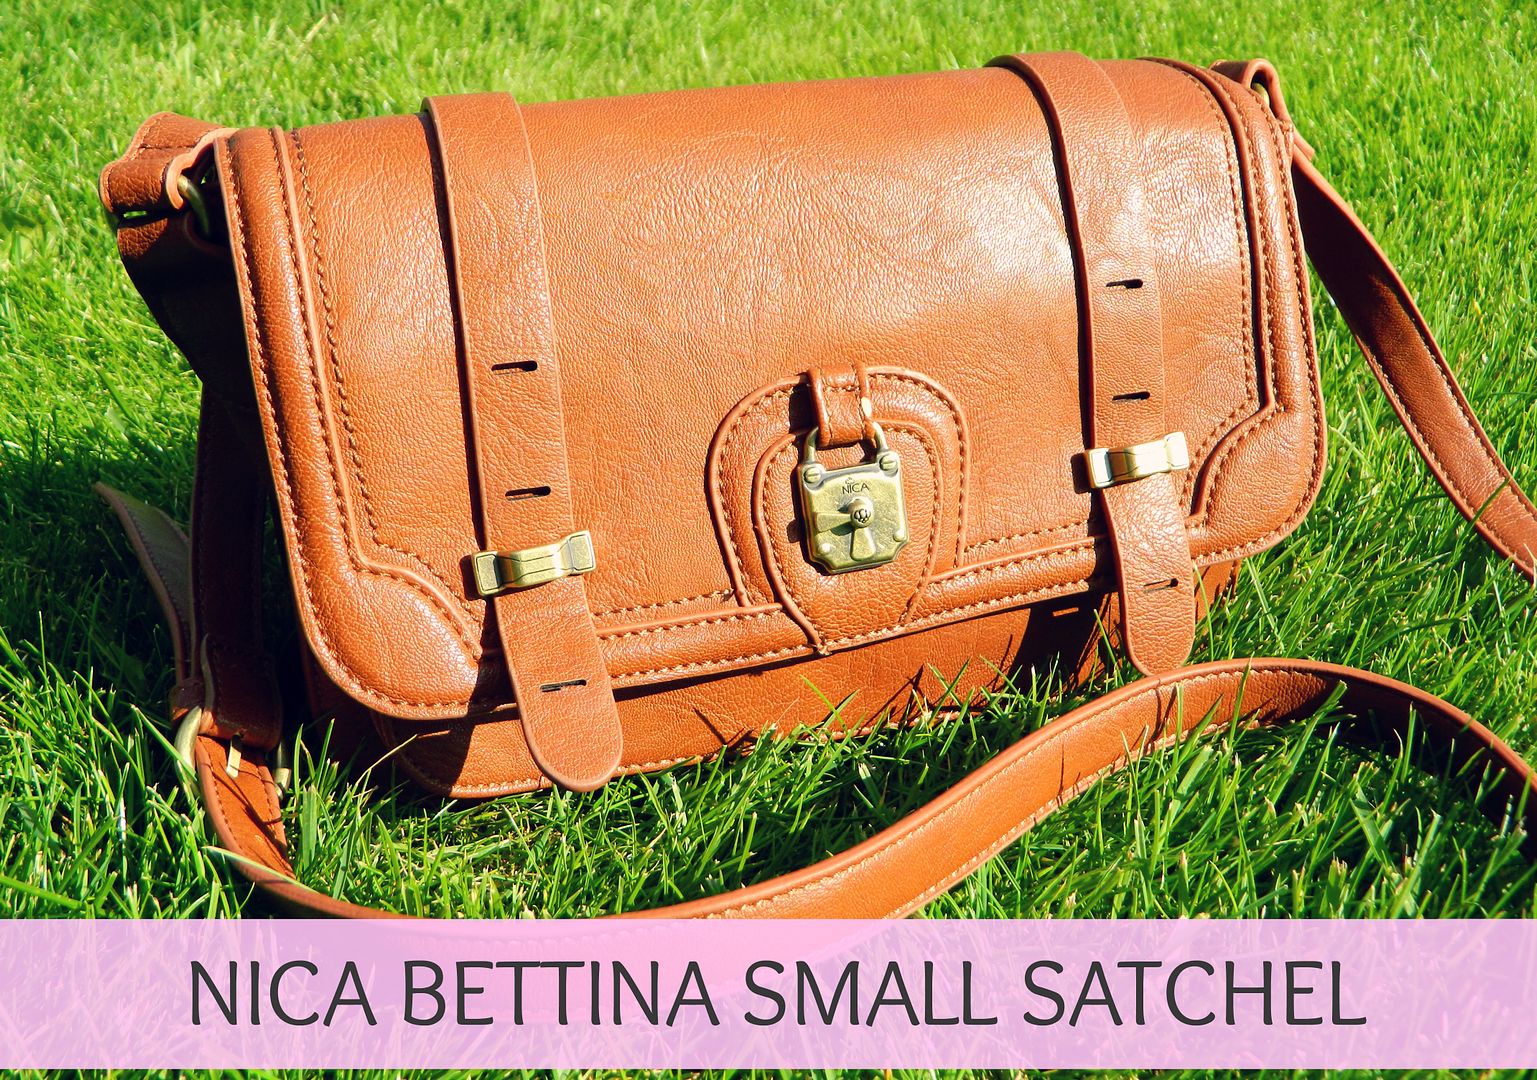 Bagable Bags Nica Bettina Small Satchel Review Belle-amie UK Beauty Fashion Lifestyle Blog